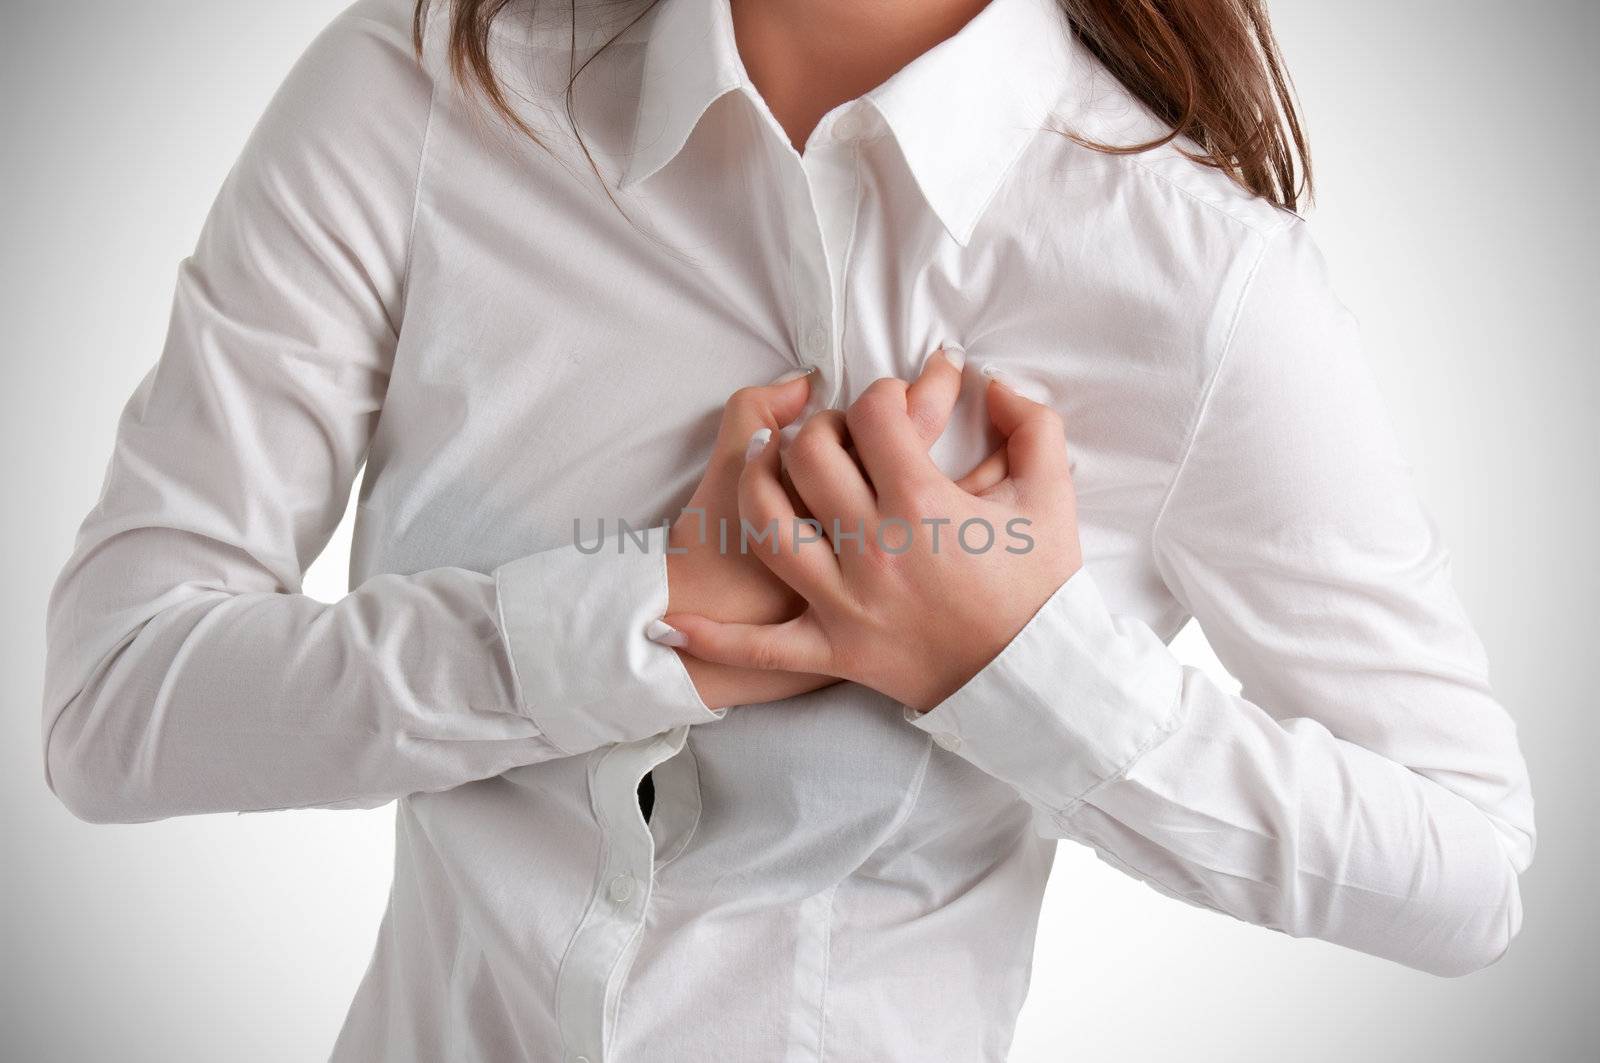 Woman having a pain in the heart area